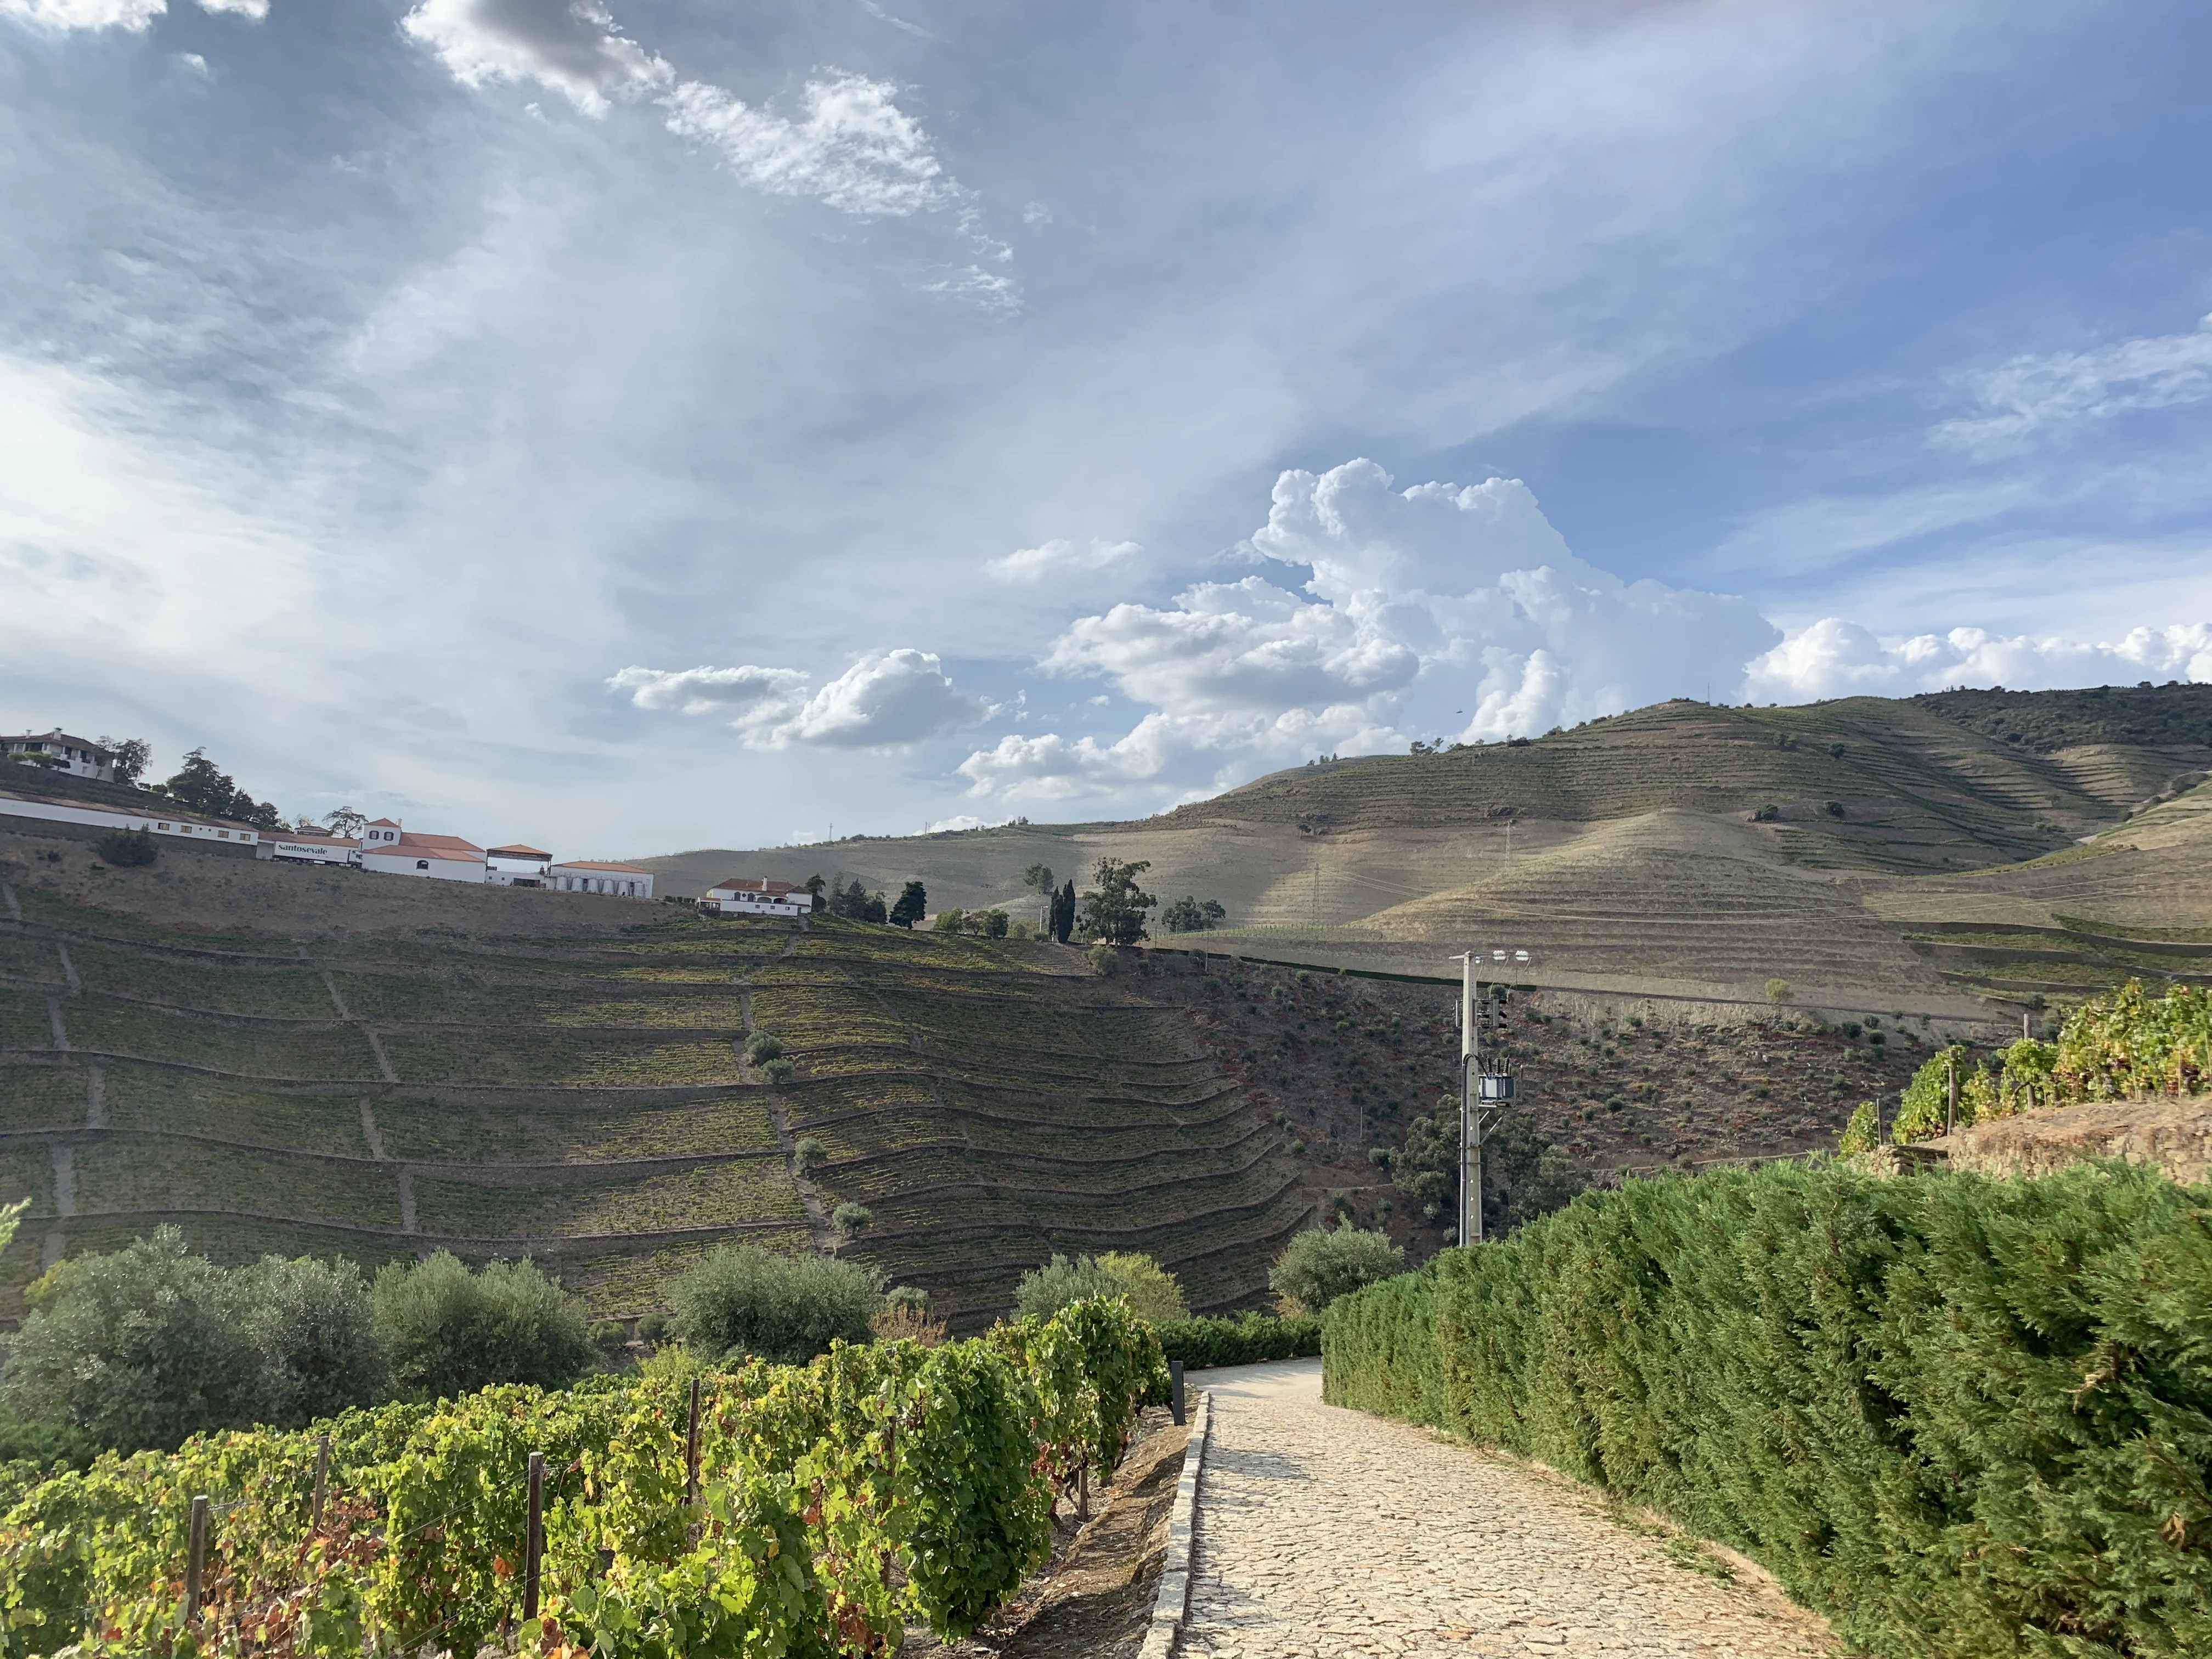 The sun shining over wine-terraced hills in the Duoro Valley